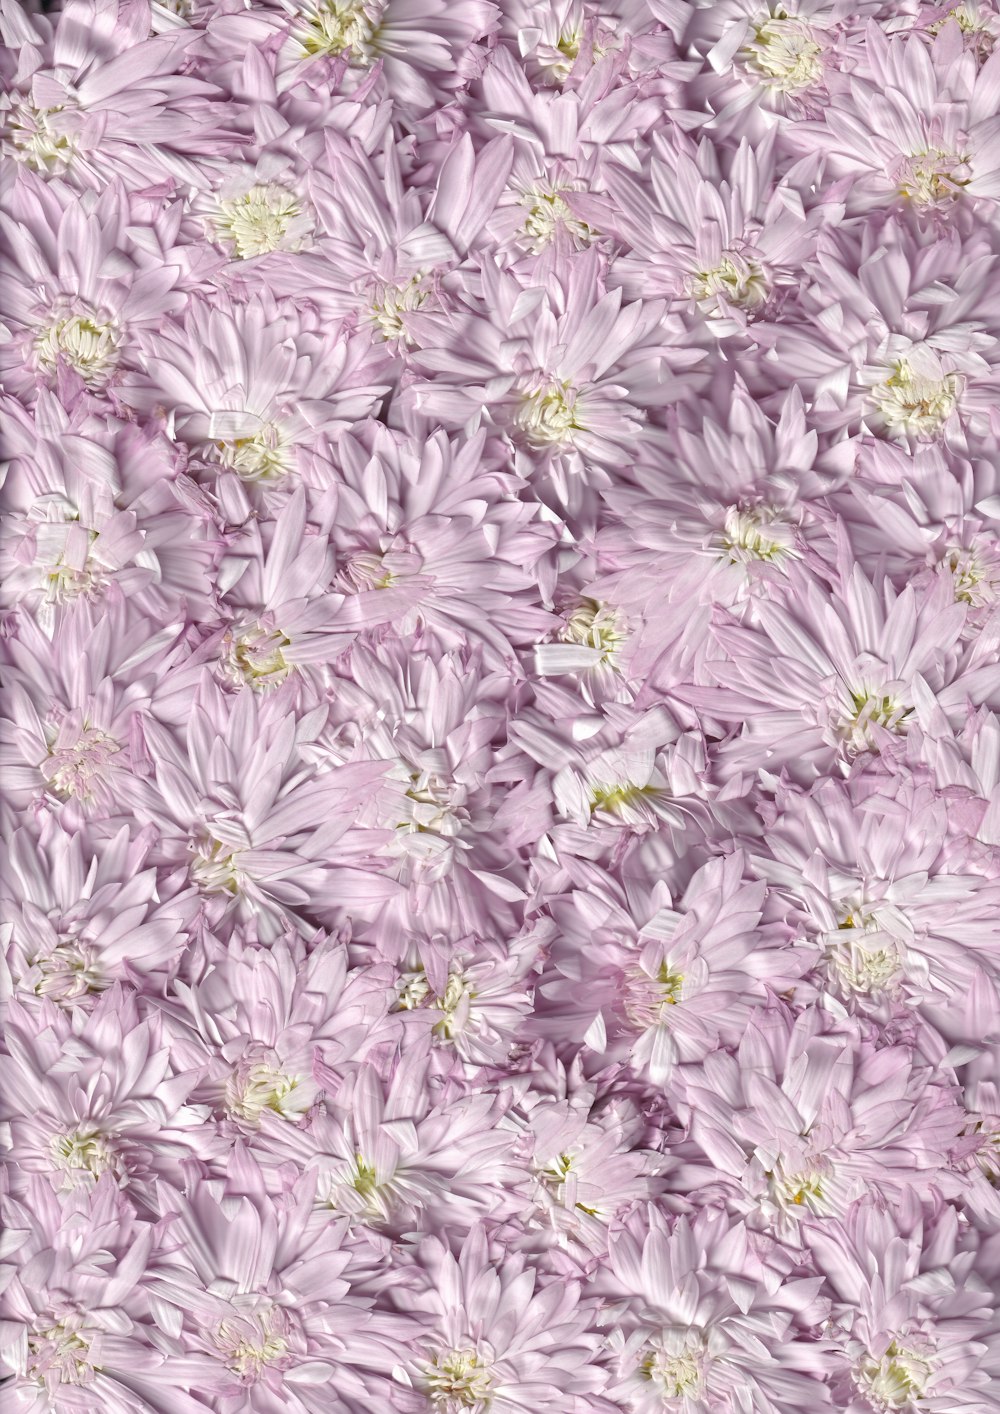 purple and white flower petals